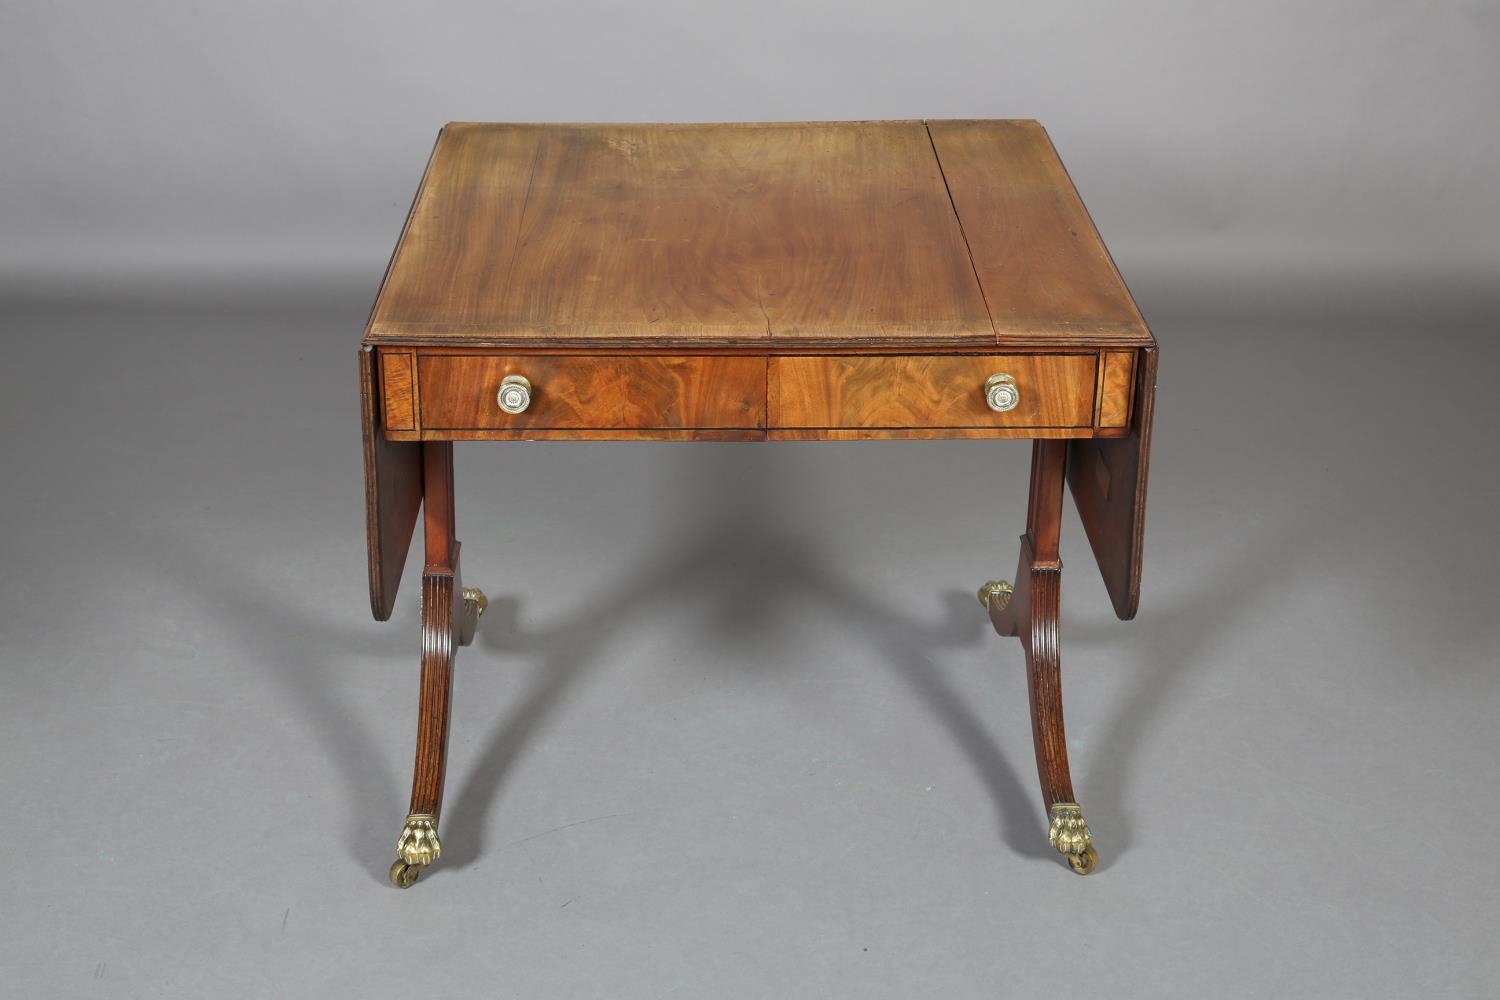 A Regency Mohogany and Rosewood crossbanded sofa table with ebony stringing, having a drawer and